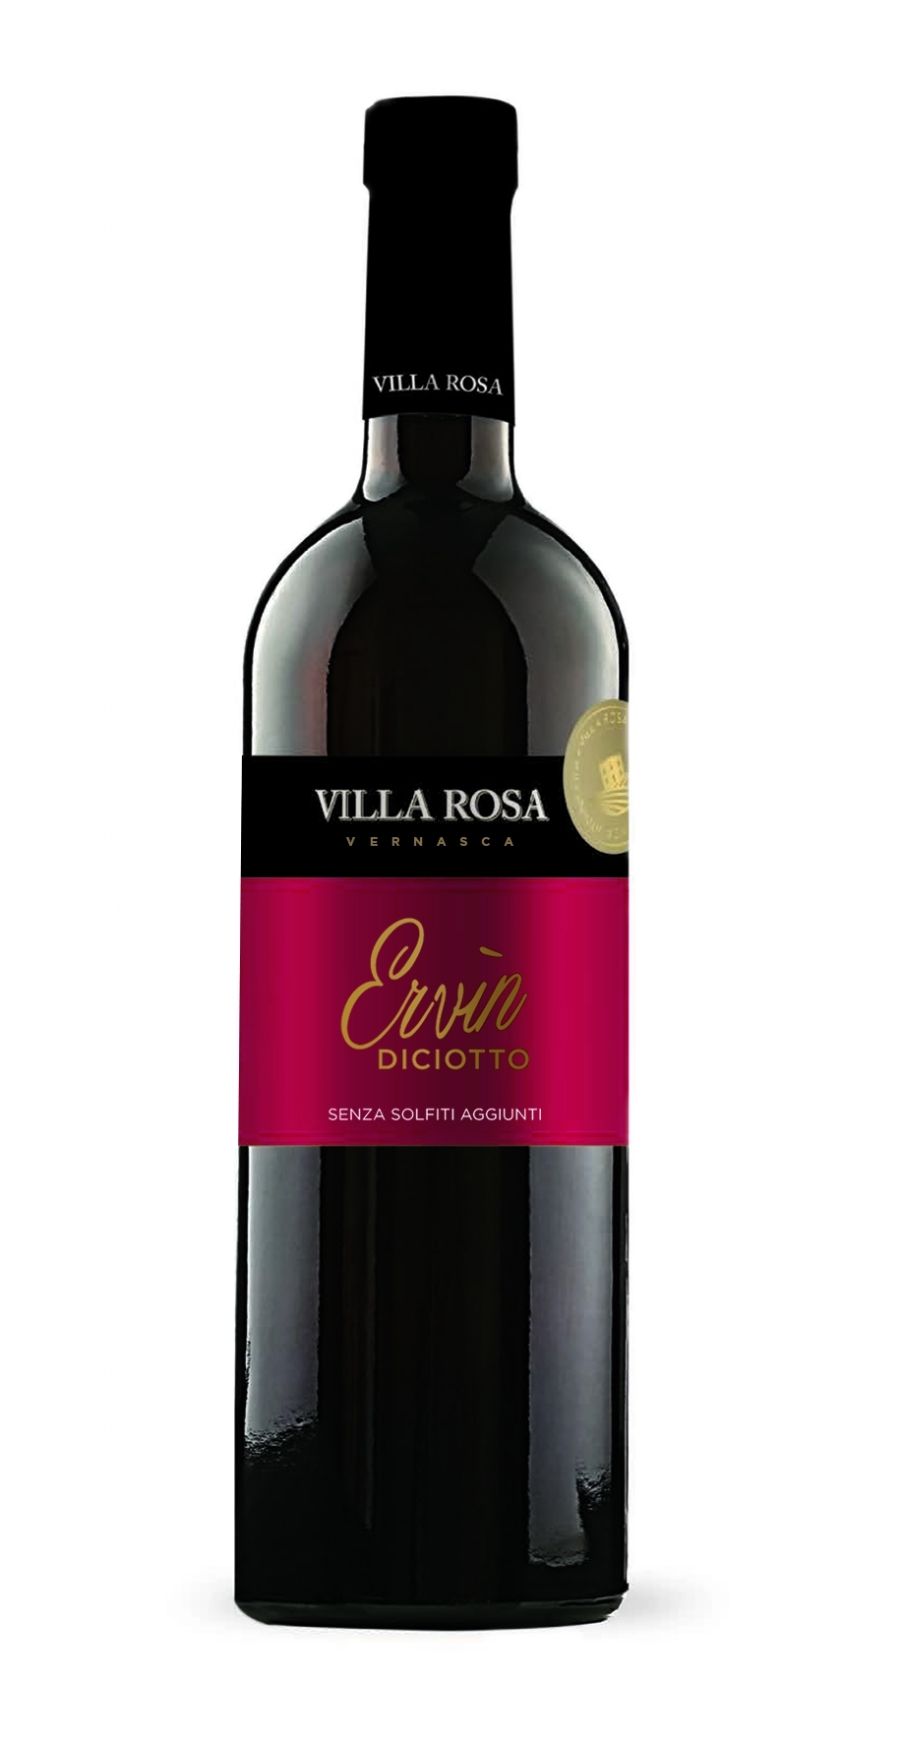 Ervin from the Villa Rosa winery